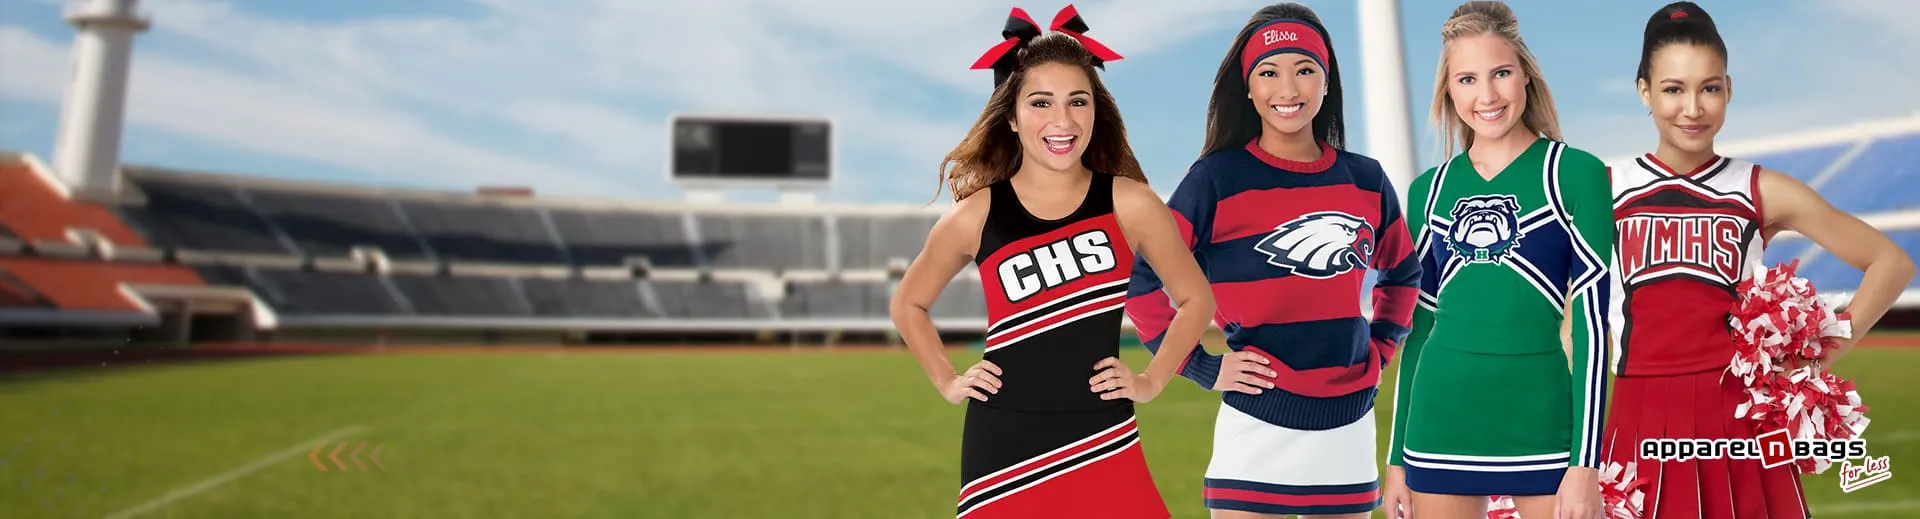 Know more about the evolution of Cheerleading Uniform and A Guide to  Choosing the Perfect Cheerleading Outfit